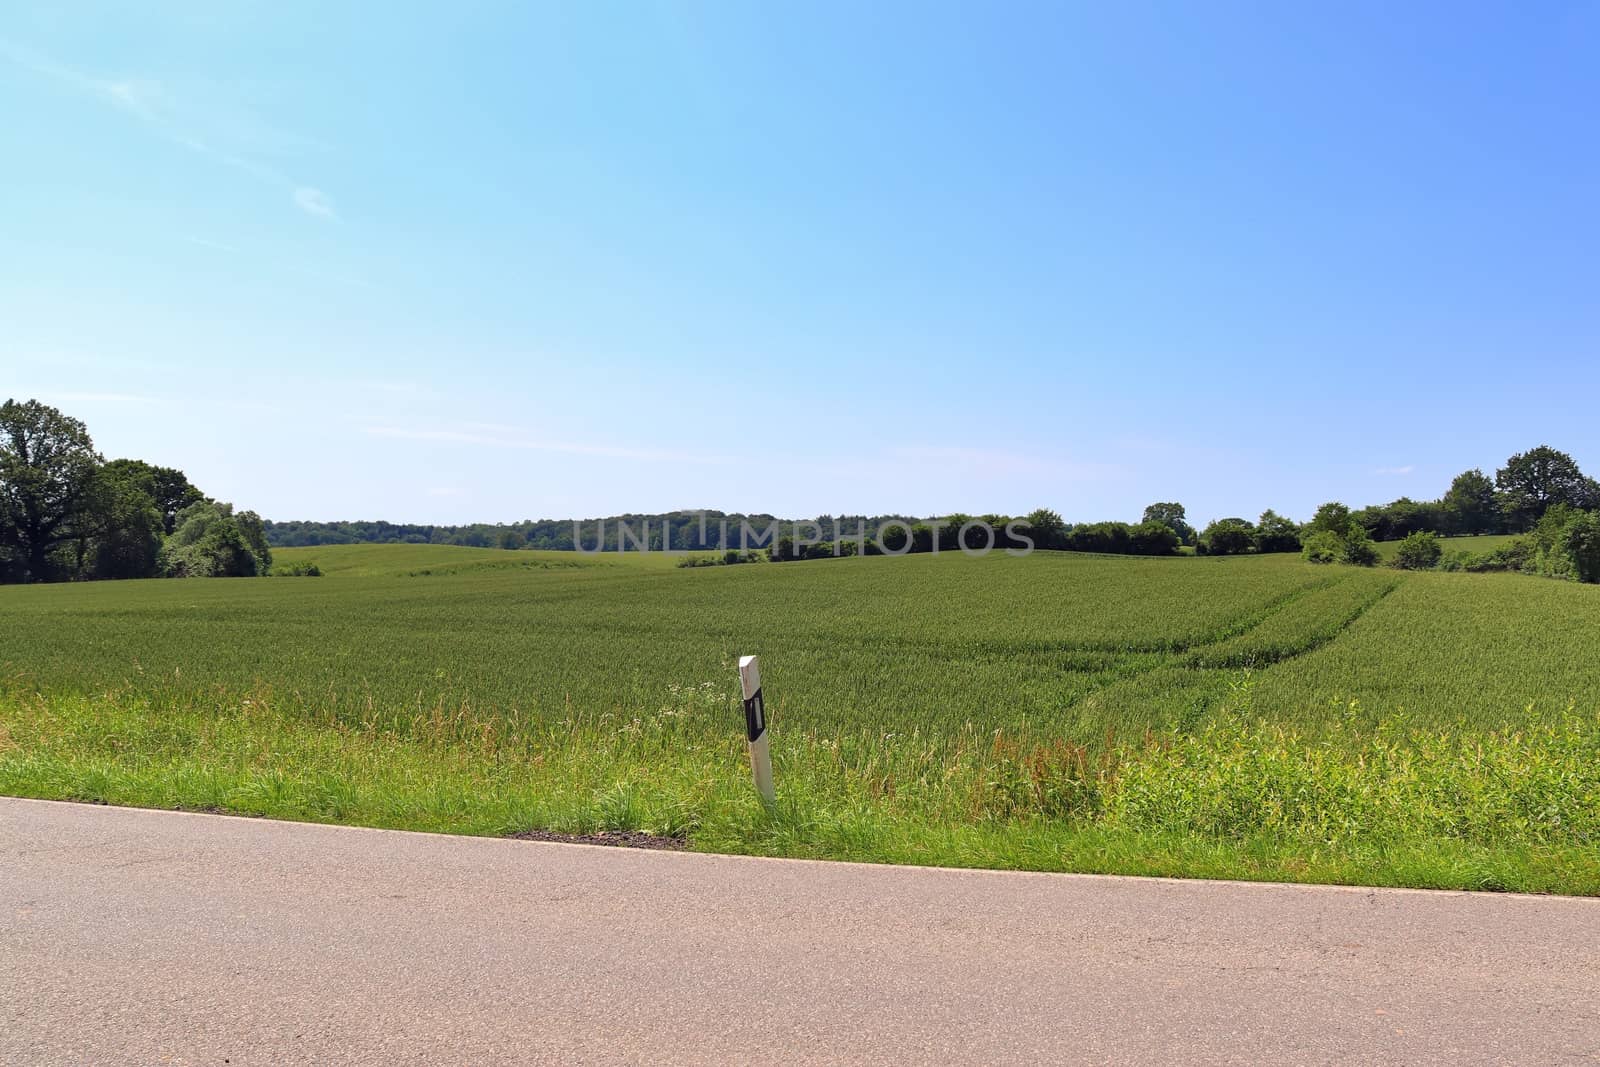 Beautiful view on countryside roads with fields and trees in northern europe.